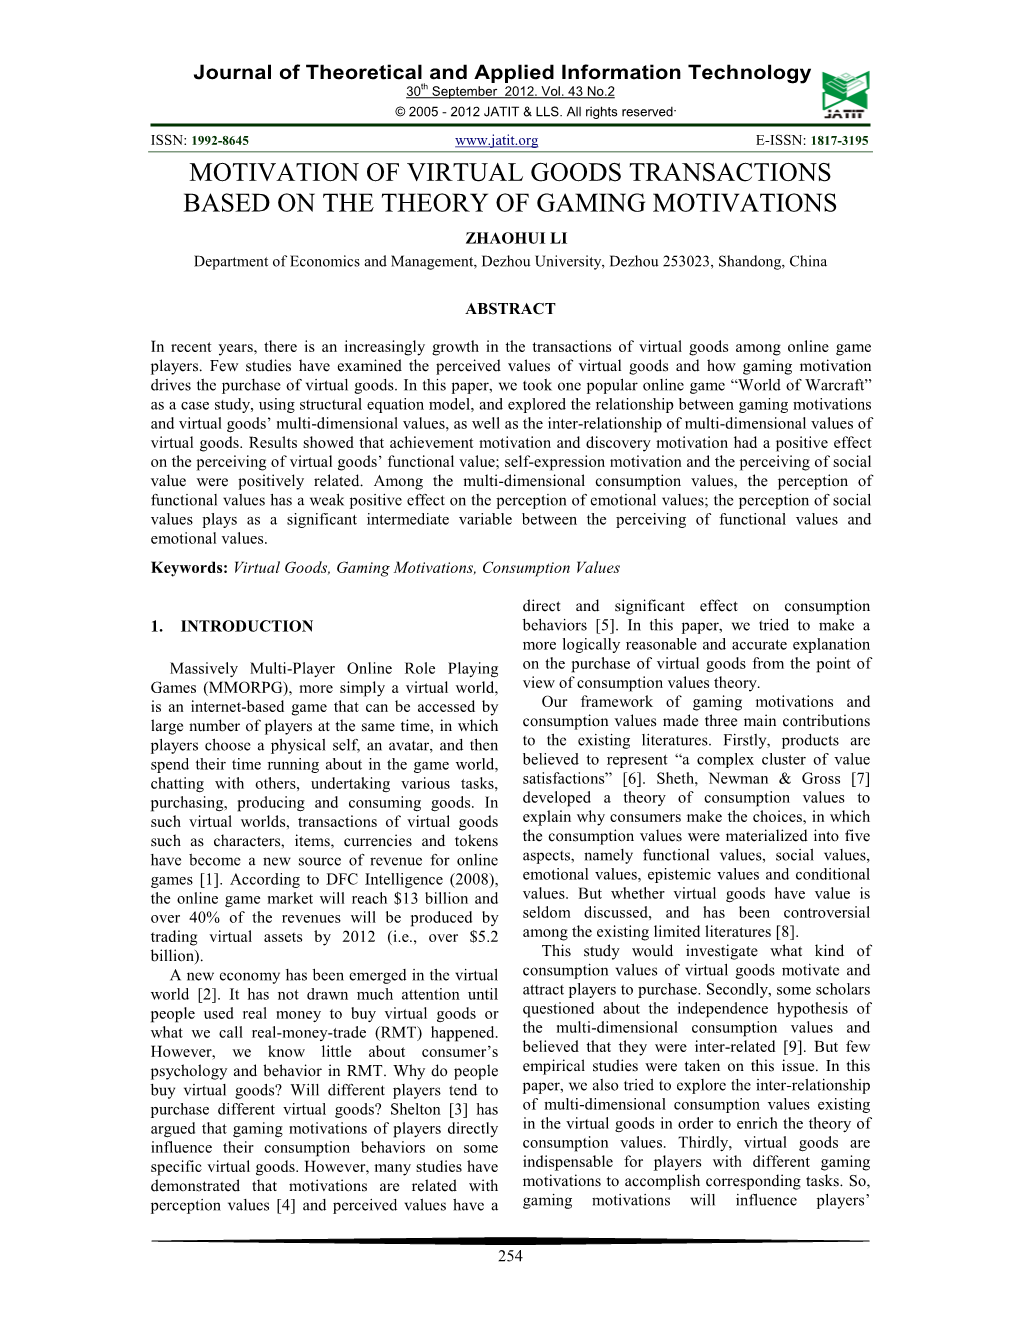 Motivation of Virtual Goods Transactions Based on The